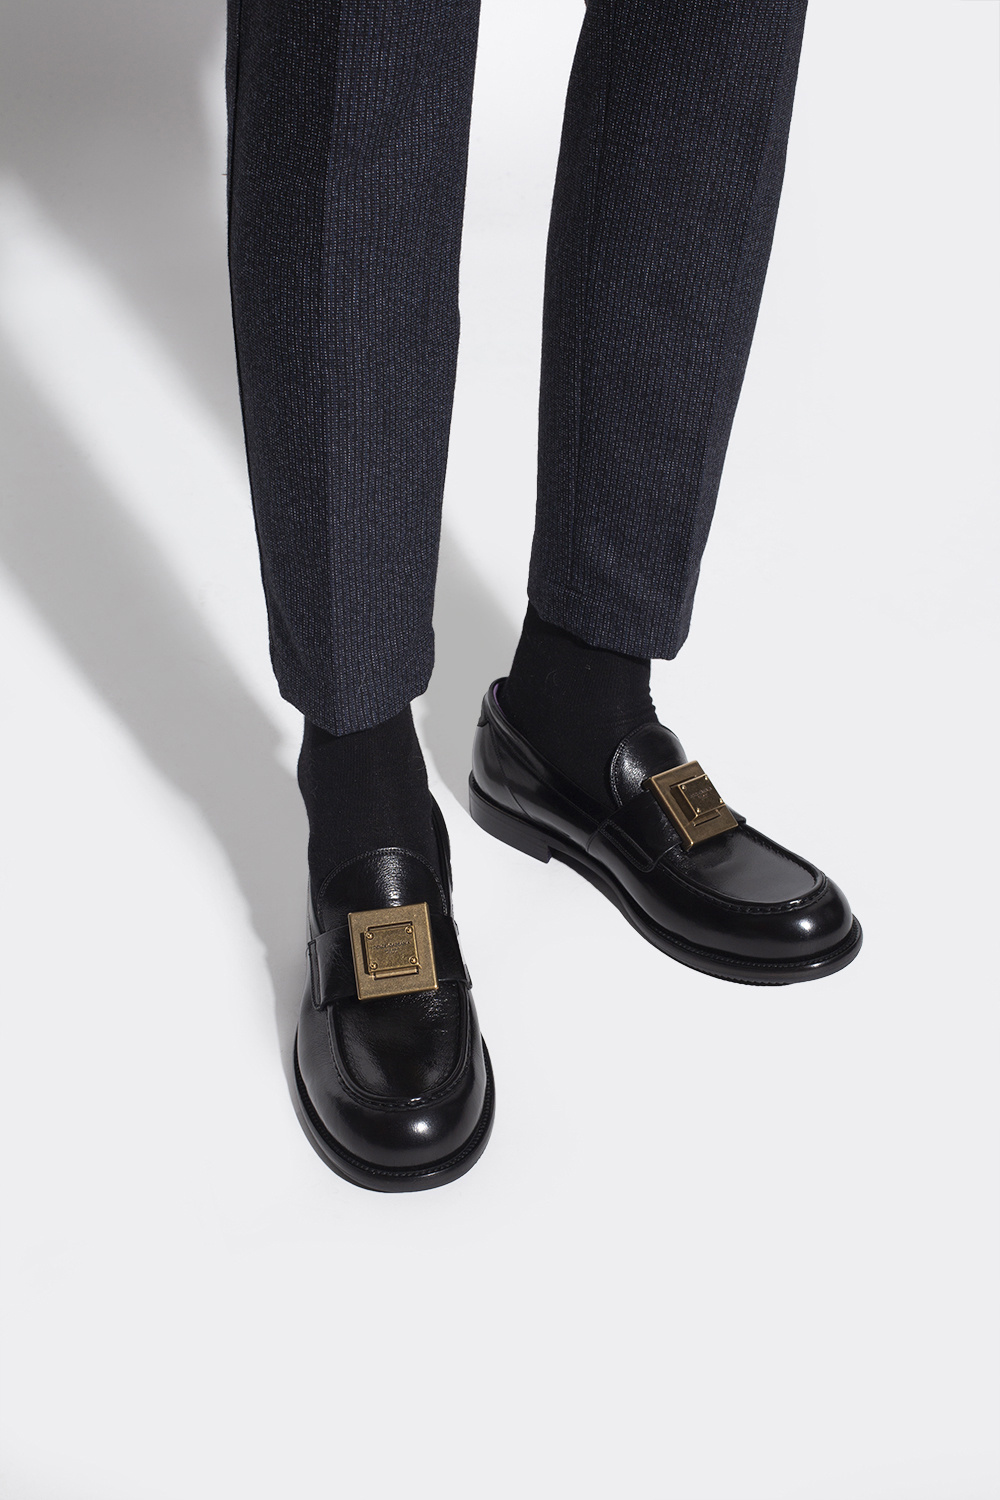 Dolce & Gabbana's Latest Are Fit for a King Leather loafers